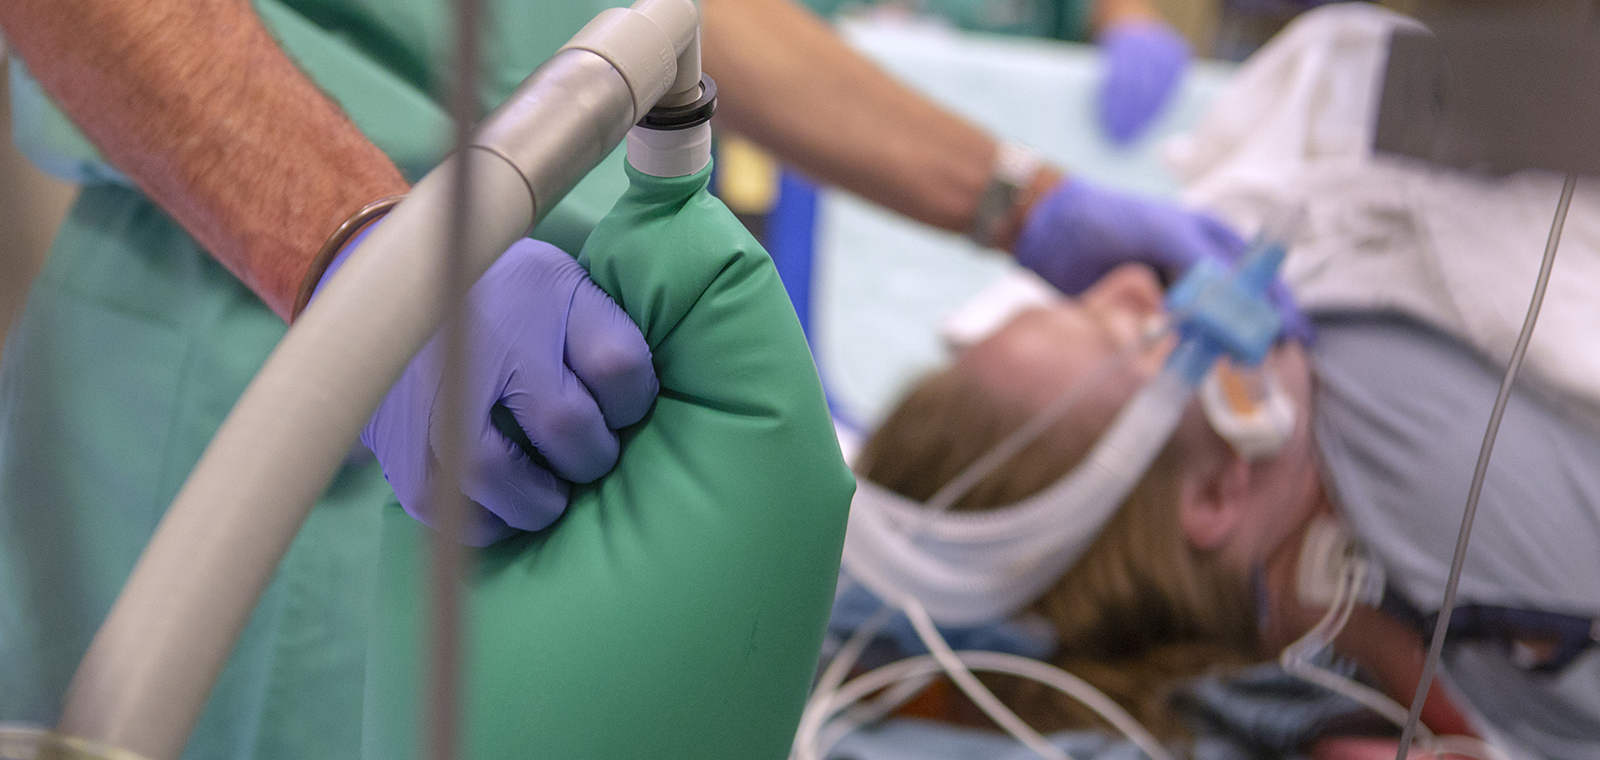 Close-up of a gloved hand holding an anesthesiology tool with a blurred patient in the background.